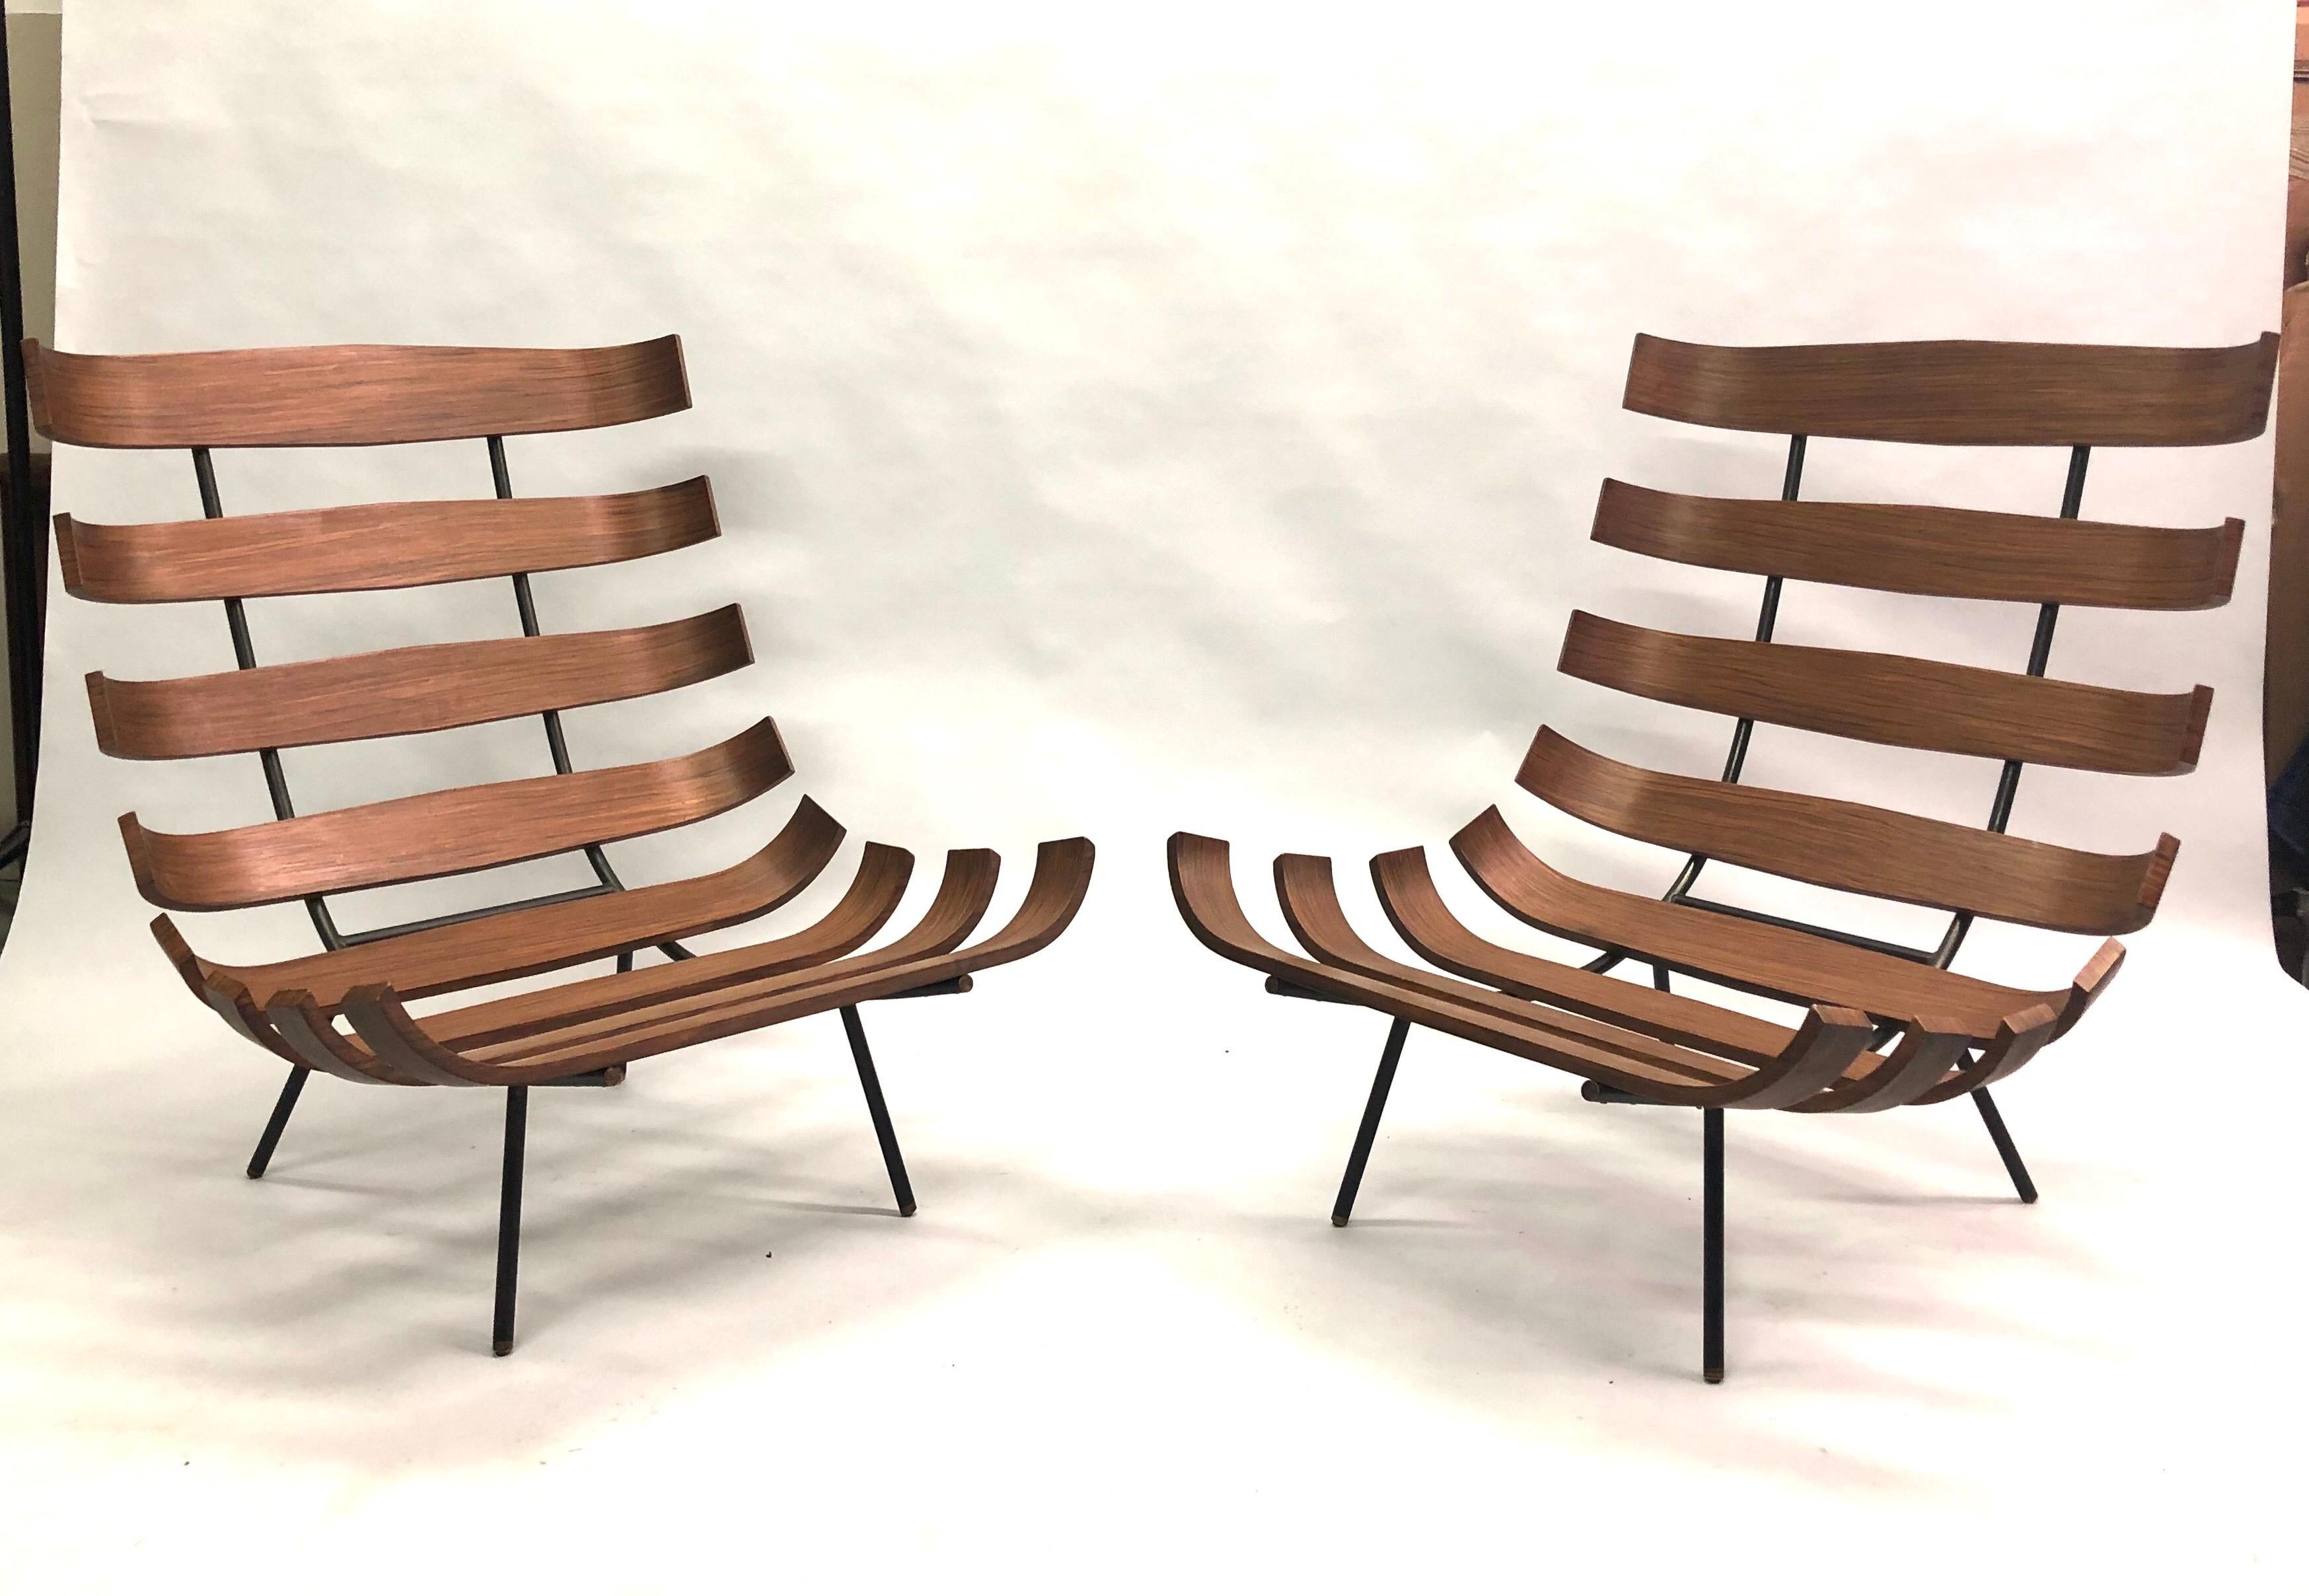 Pair of Brazilian Mid-Century Modern 'Costela' Armchairs / Lounge Chairs by Carlo Hauner and Martin Eisler, circa 1954. 

Black enameled steel frame, tiny brass finial feet and curved Brazilian Rosewood ribbed structure in a subtle, matte patina.